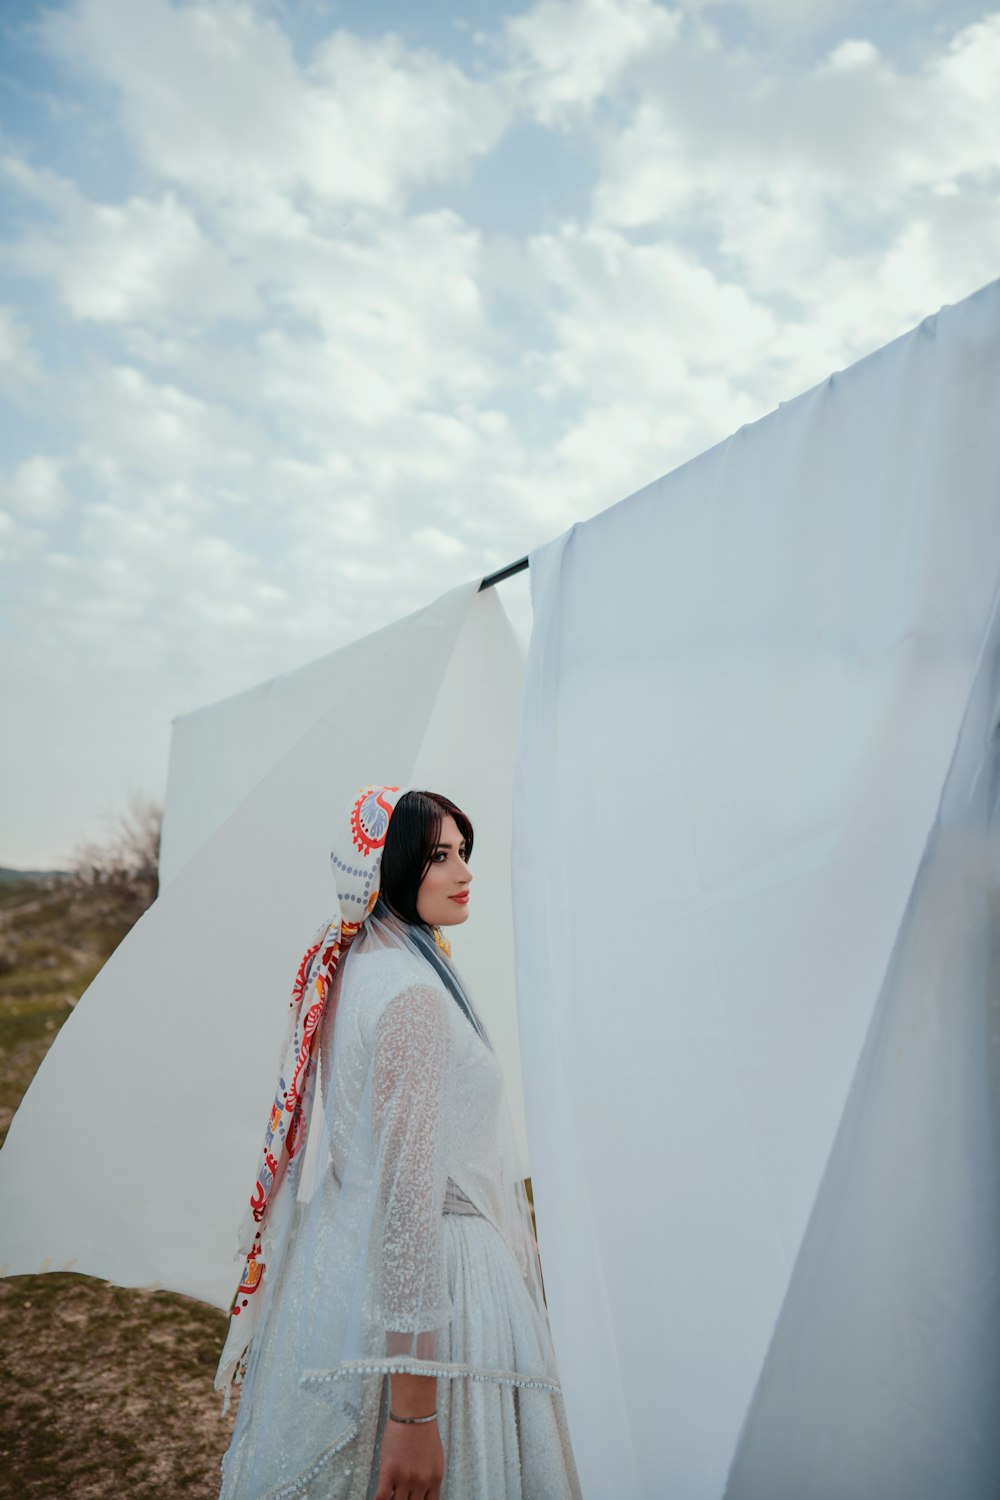 a woman in a white dress standing next to a white sheet